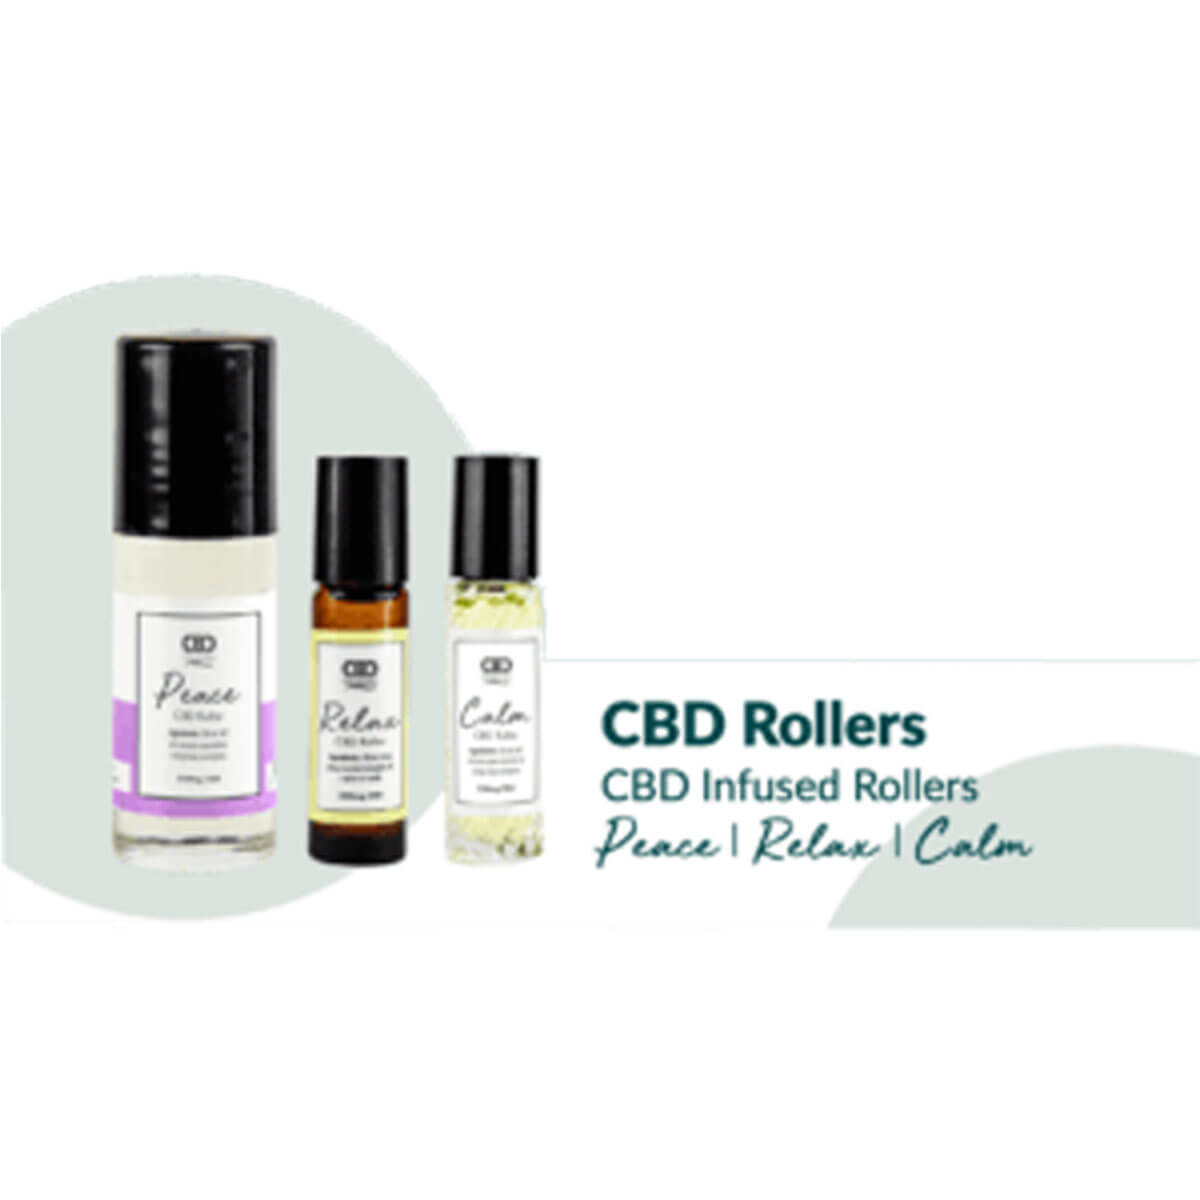 Three cbd infused rollers labeled "peace," "relax," and "calm" against a light background.